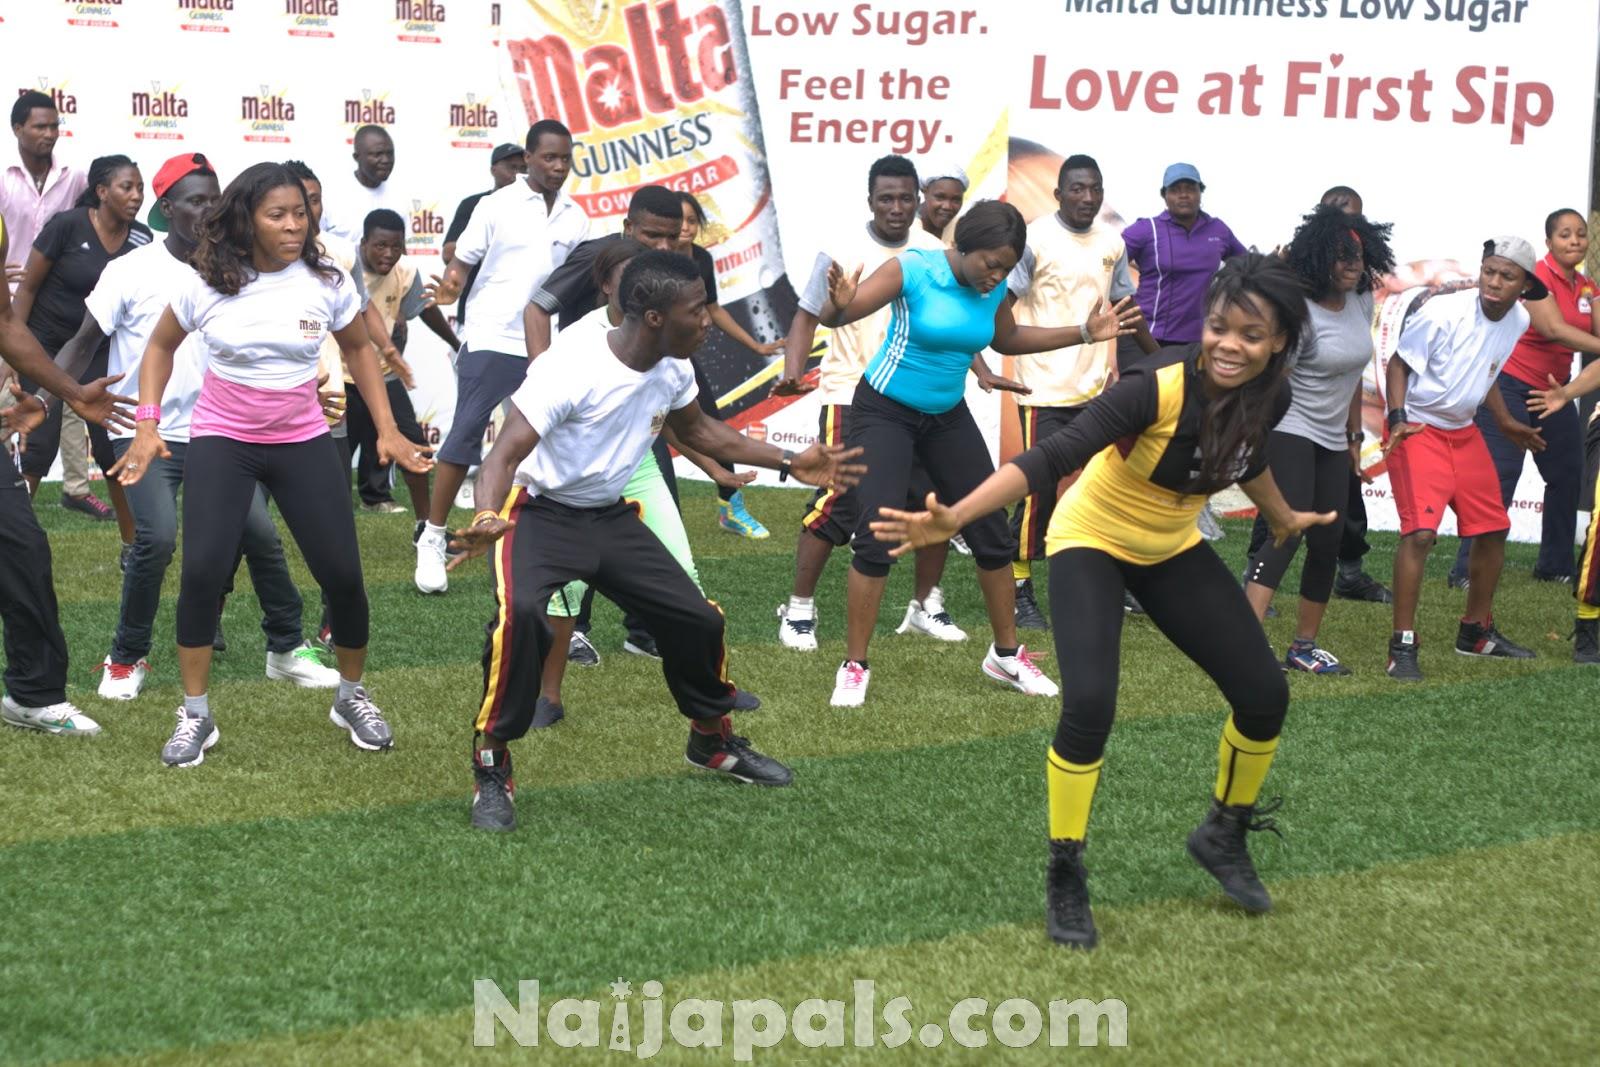 Photos From Malta Guinness Low Sugar Fans - Celebrity Workout 1